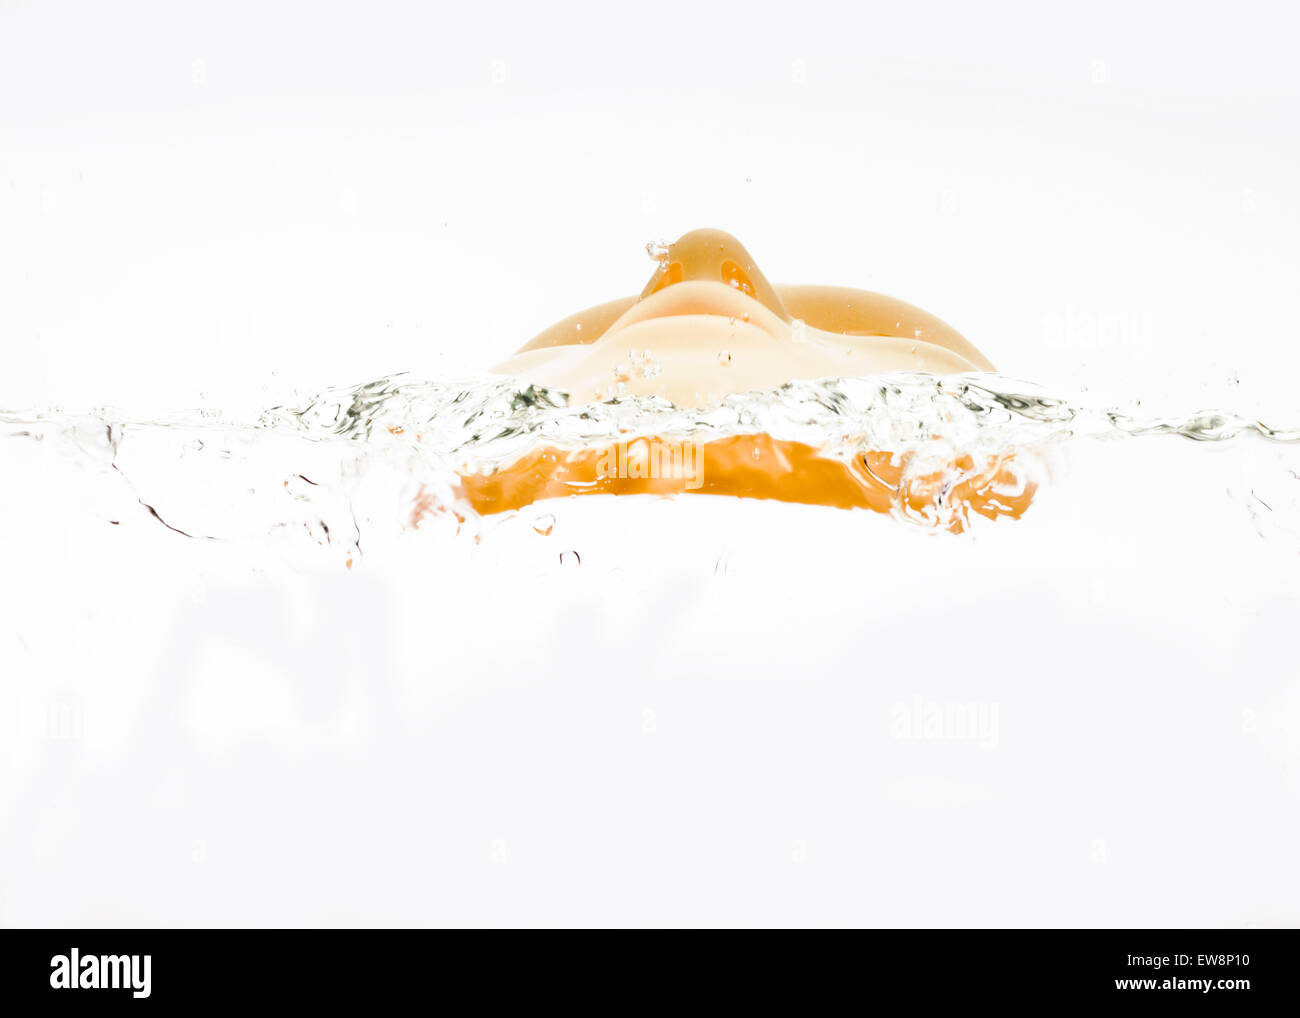 HUMAN FACE MASK IN WATER Stock Photo